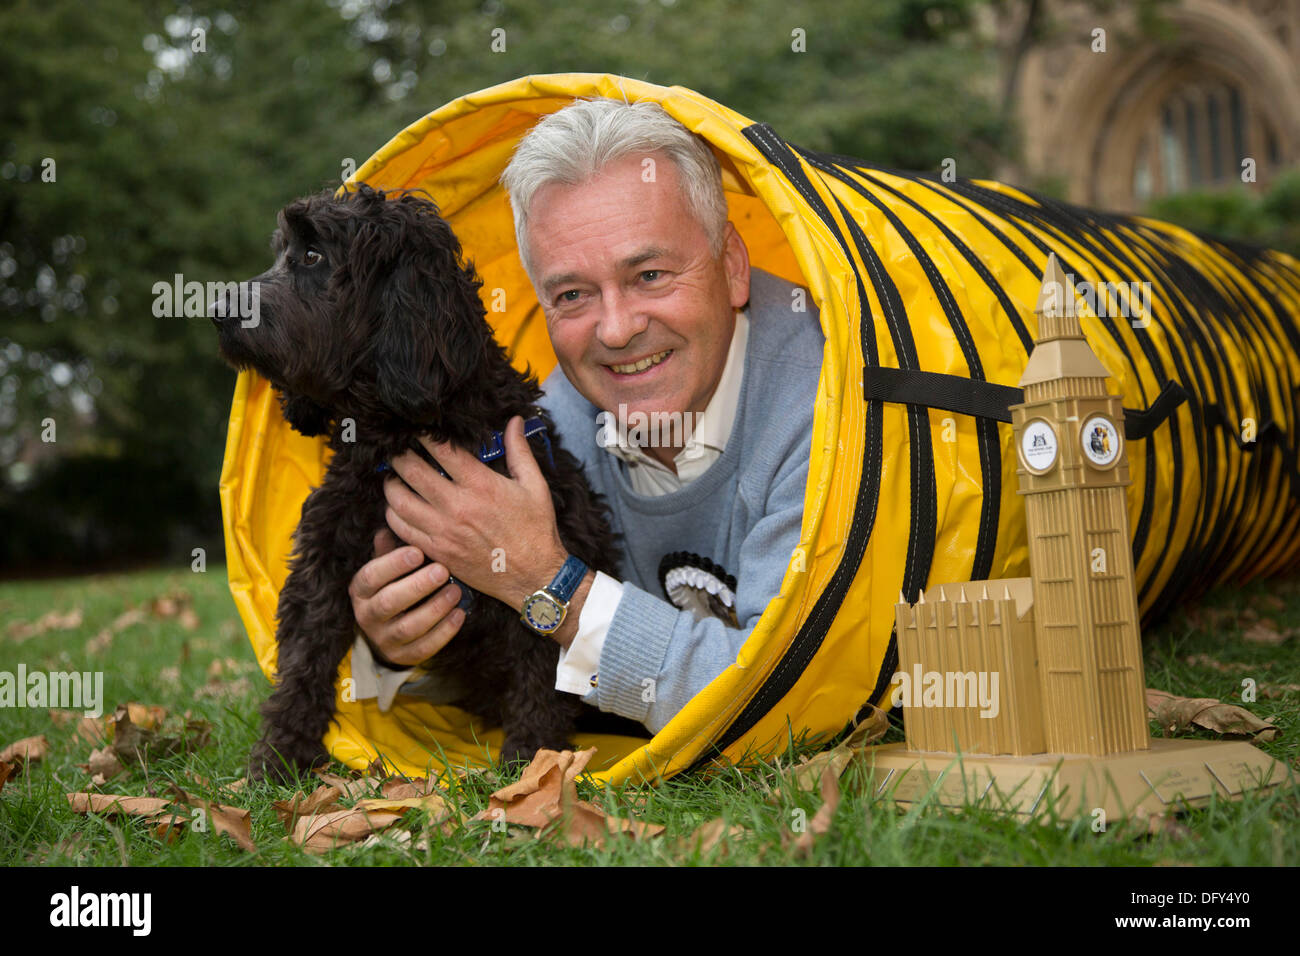 London, UK. Thursday 10th October 2013. The winner Alan Duncan MP and Noodle, a Cocker Spaniel / Poodle cross. MPs and their dogs competing in the Westminster Dog of the Year competition celebrates the unique bond between man and dog - and aims to promote responsible dog ownership. Credit:  Michael Kemp/Alamy Live News Stock Photo